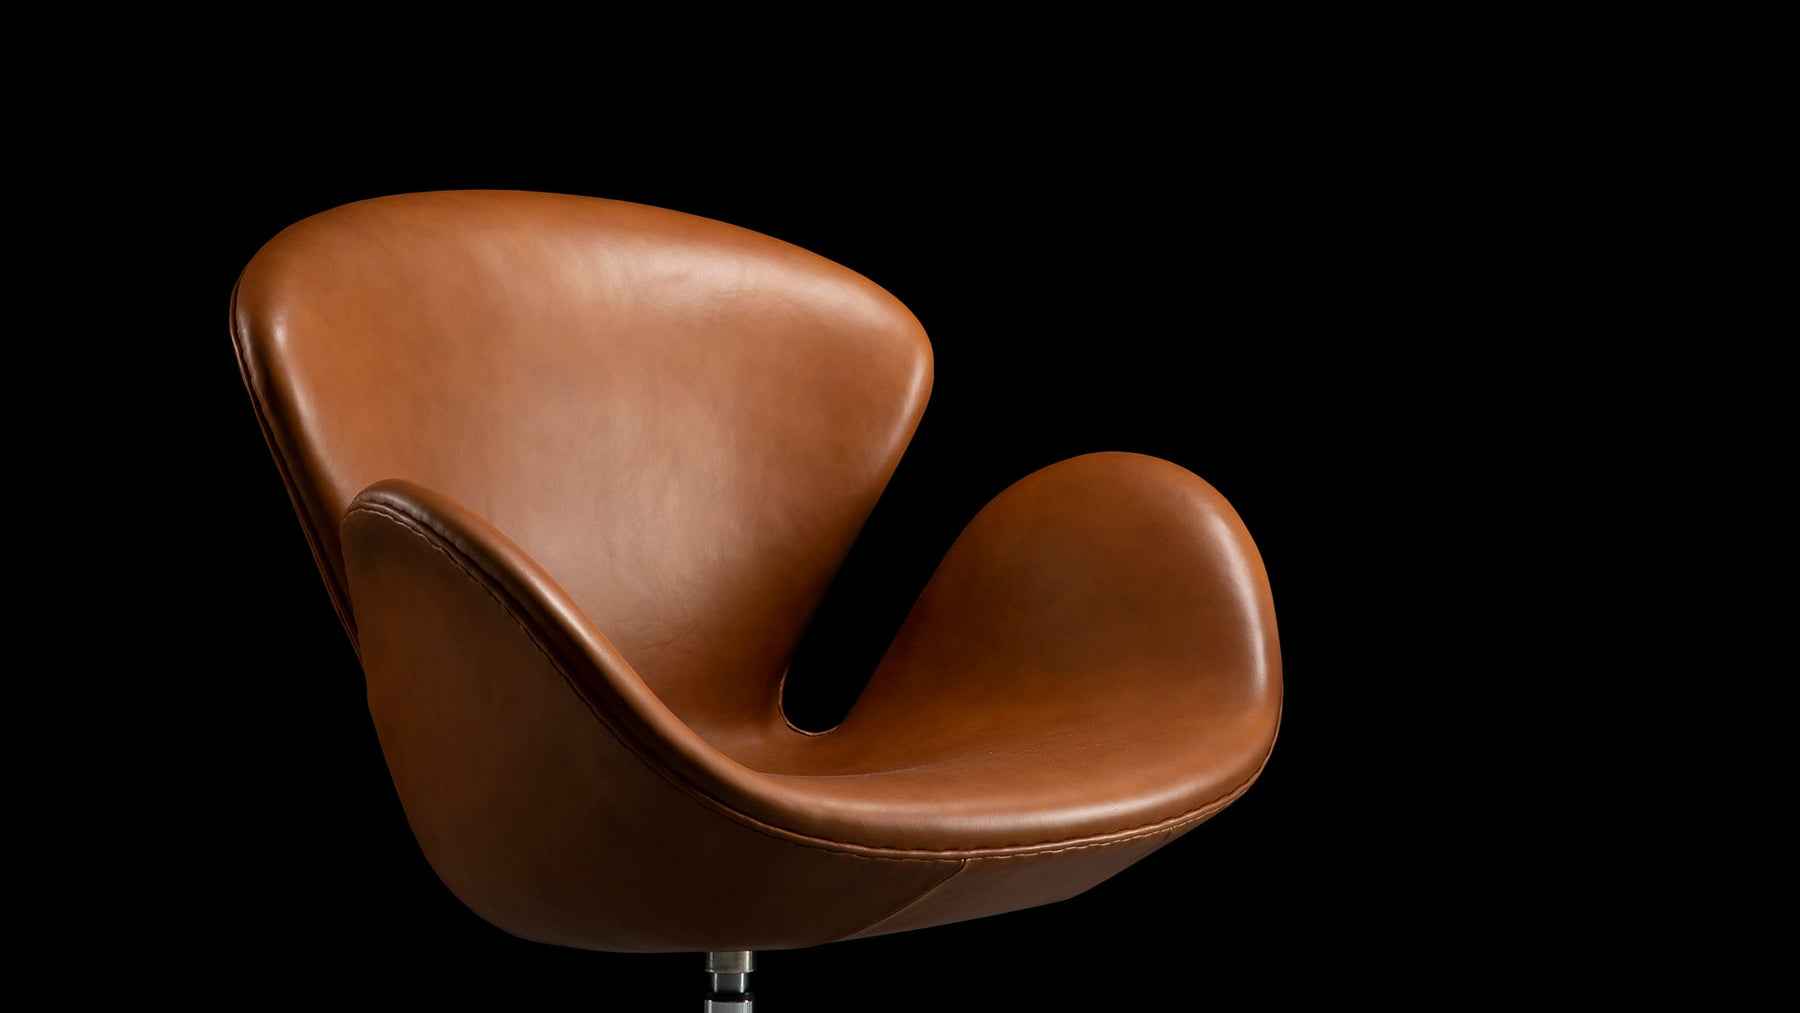 A solitary light from afar catches the top of and illuminates the tan leather of the Arne Jacobsen Swan Chair in this beautiful banner photograph image